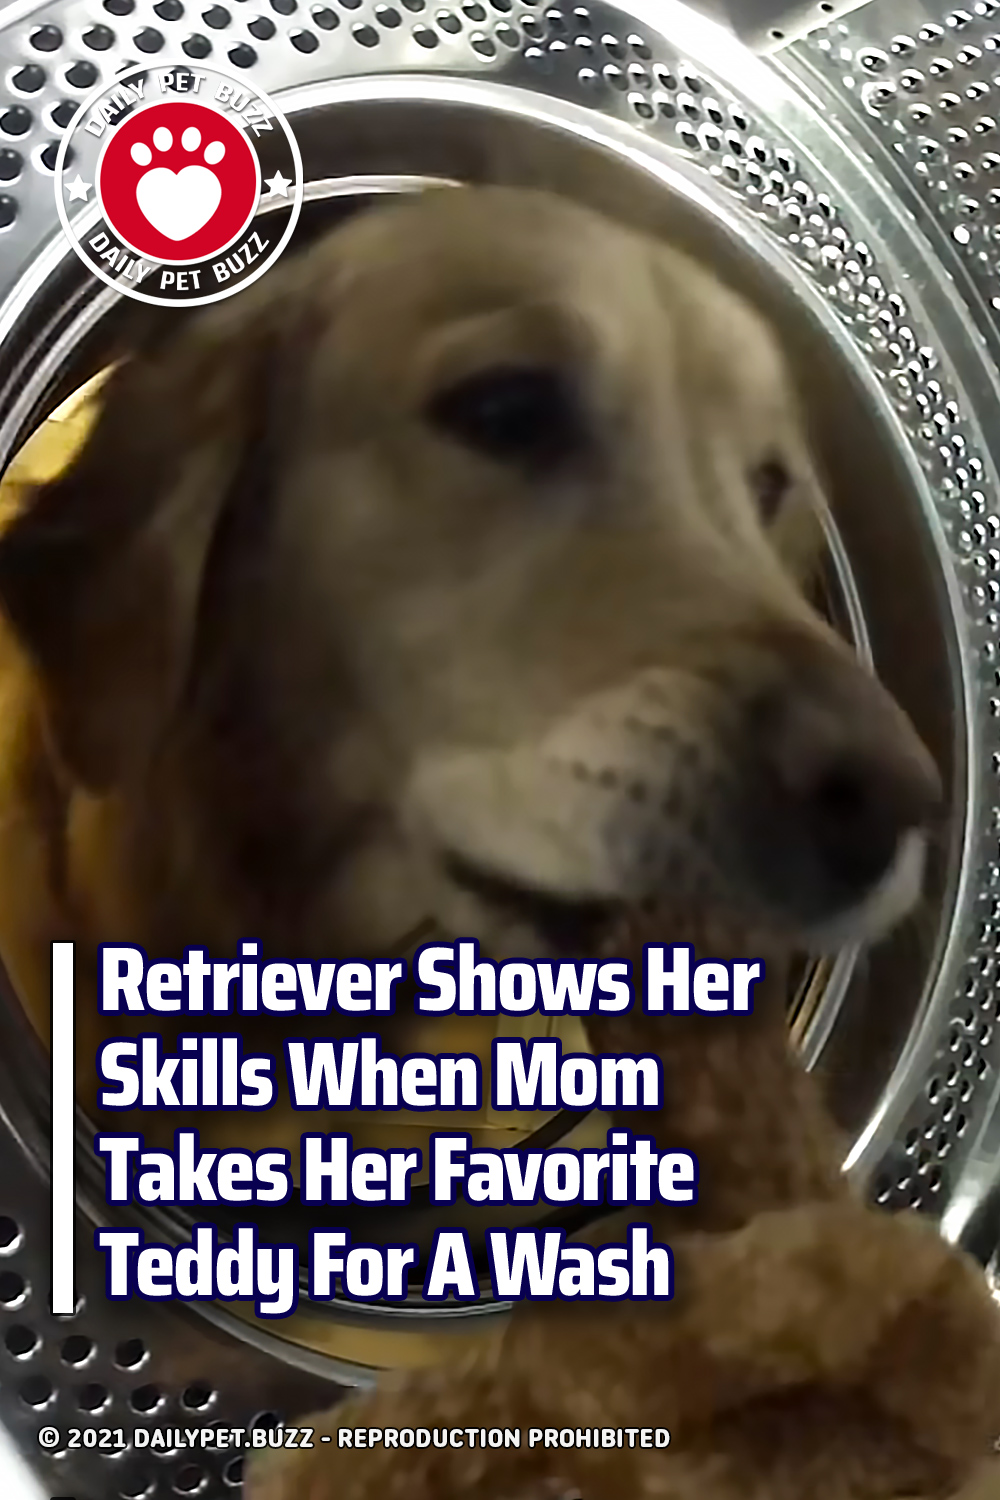 Retriever Shows Her Skills When Mom Takes Her Favorite Teddy For A Wash